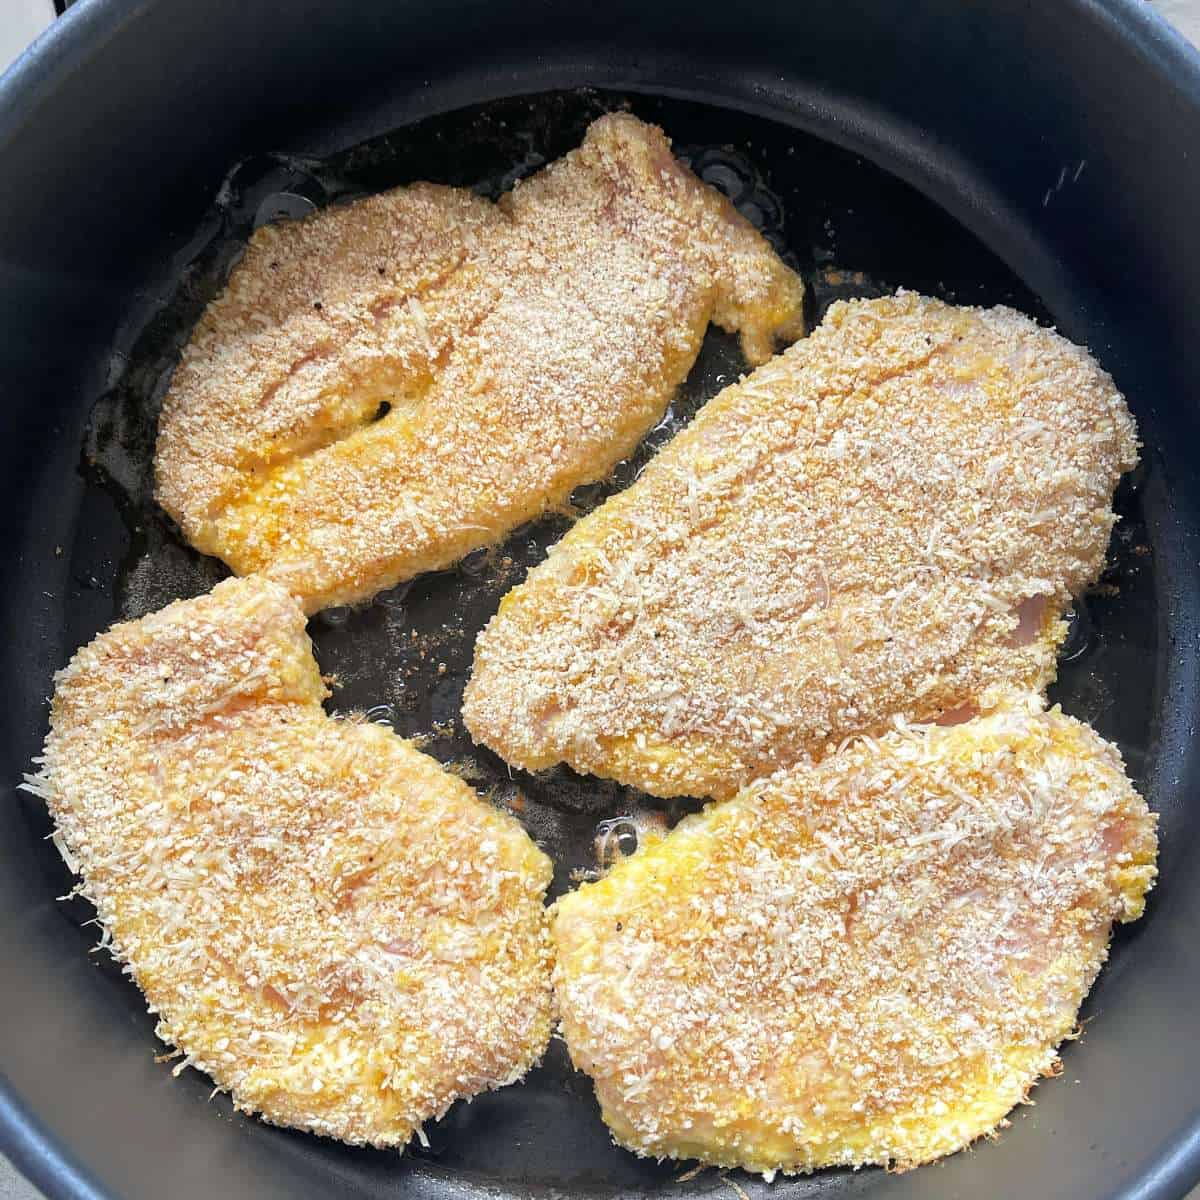 Crumbed chicken breast frying in a frypan